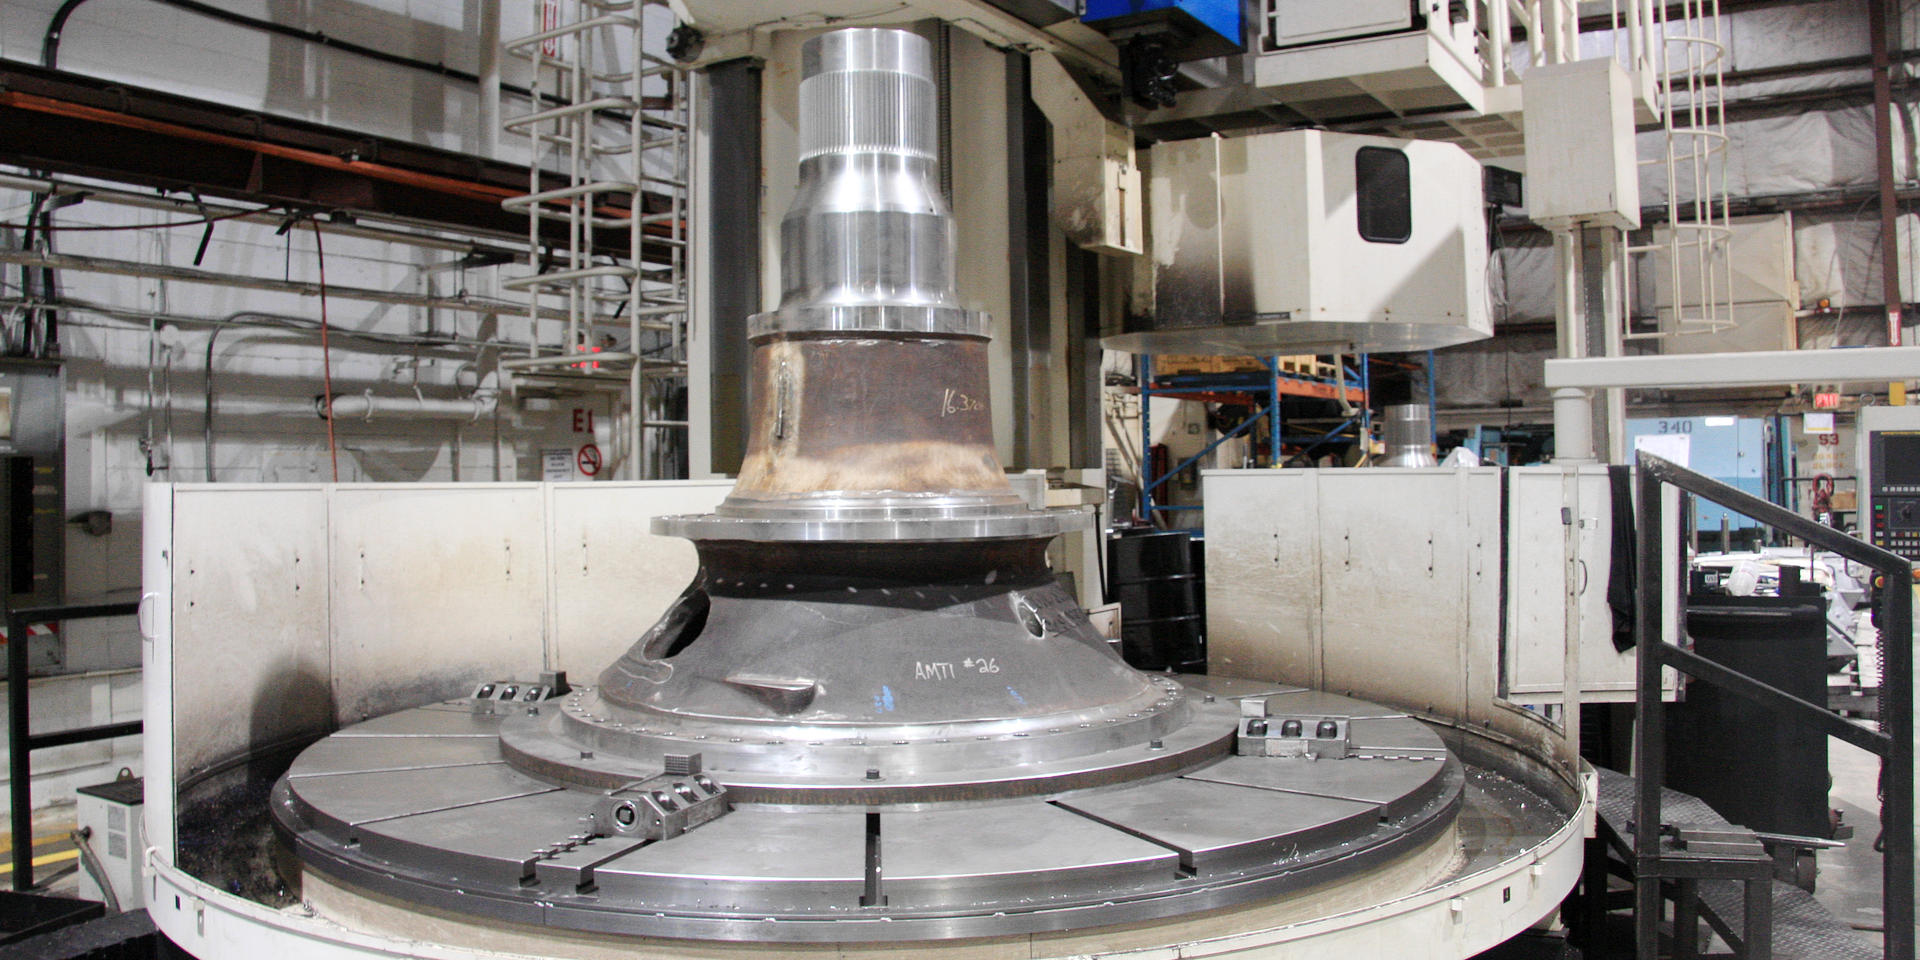 Rear spindle being machined on a TSS Lathe. The spindle is part of the mining industry.